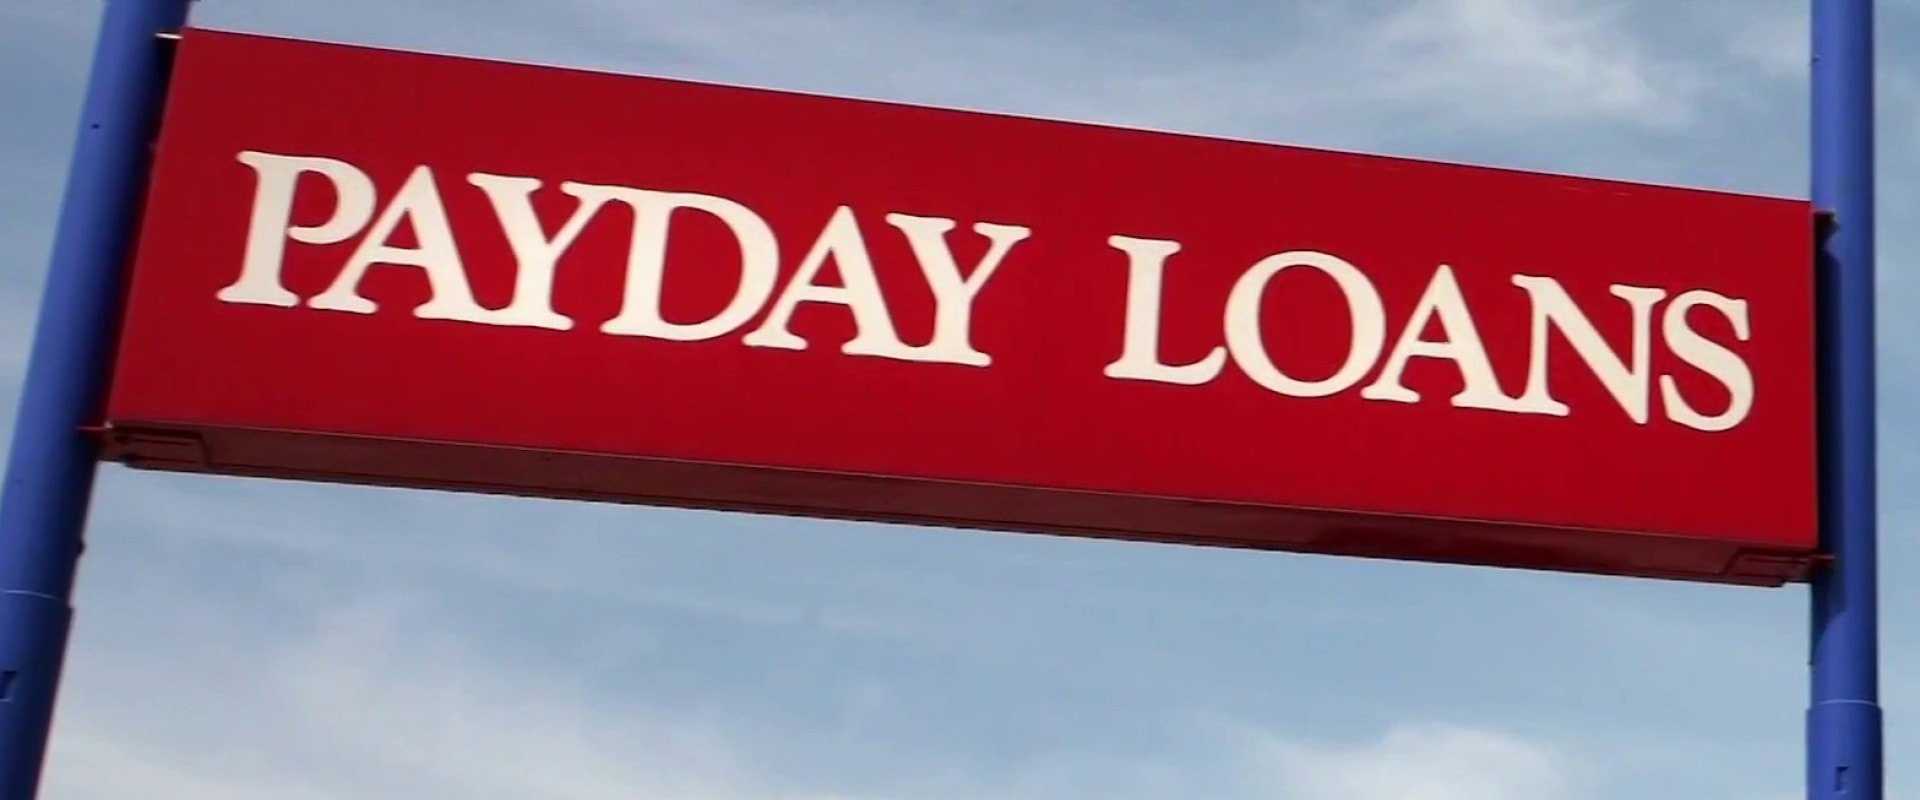 Where to Find Payday Loans Near Me